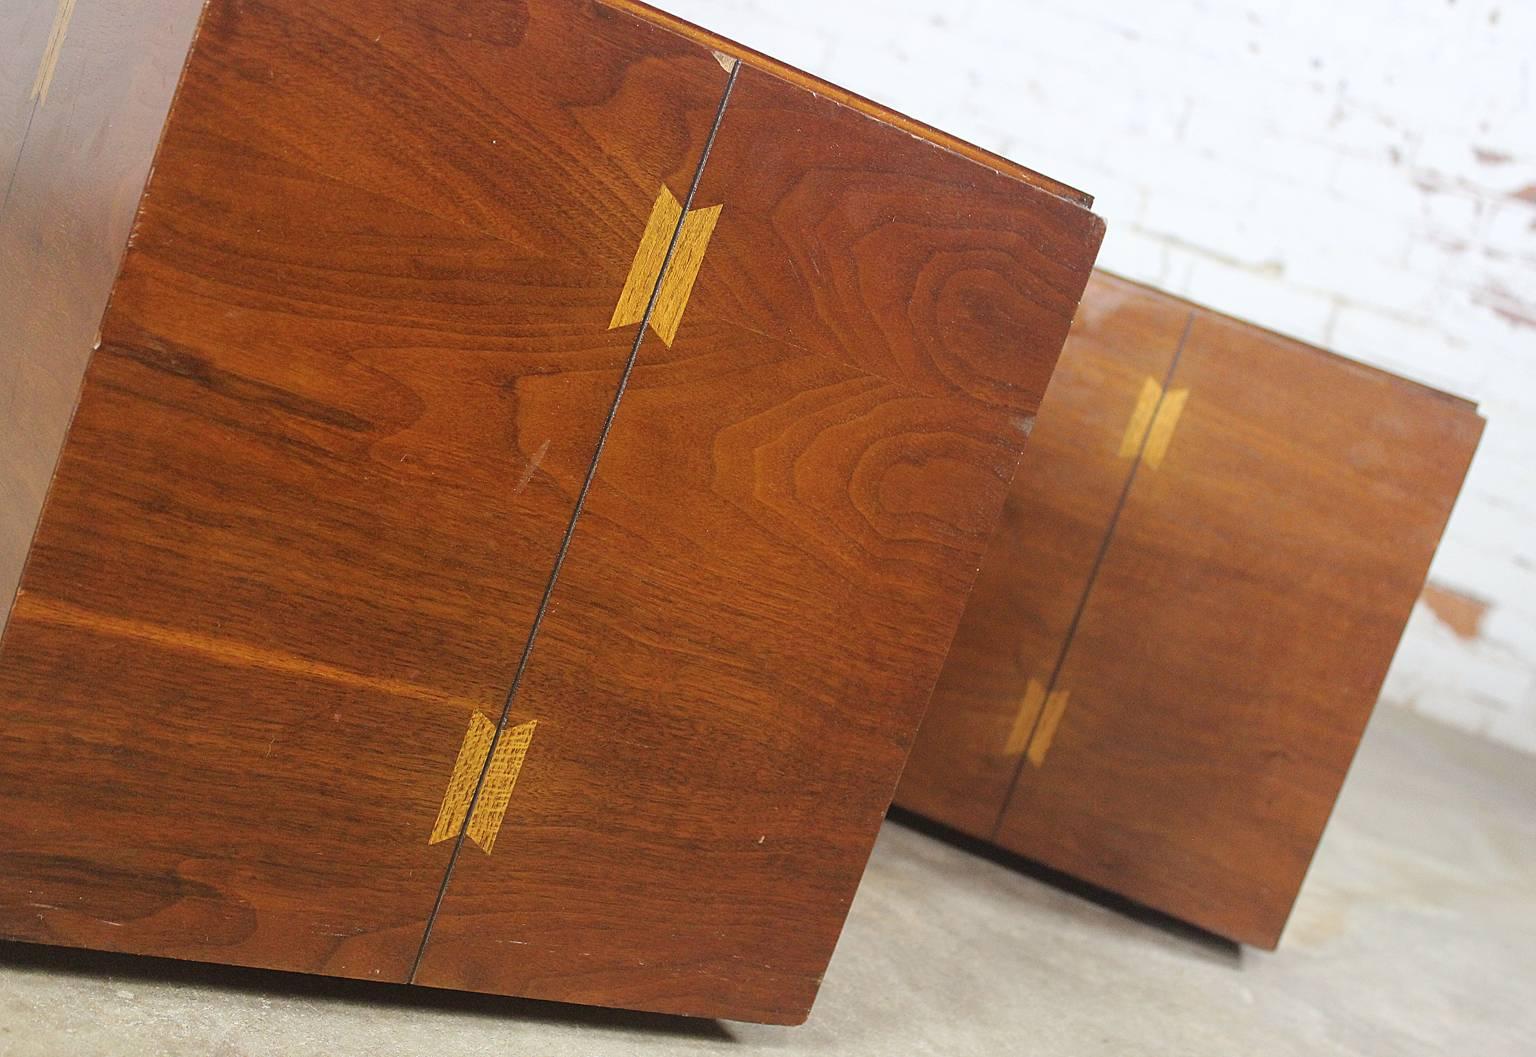 Handsome and versatile pair of lane Mid-Century Modern rolling cube side tables. Notice the beautiful butterfly joint inlay design and the black laminate tops. This pair of cube end tables are in wonderful vintage condition.

Simply incredible and